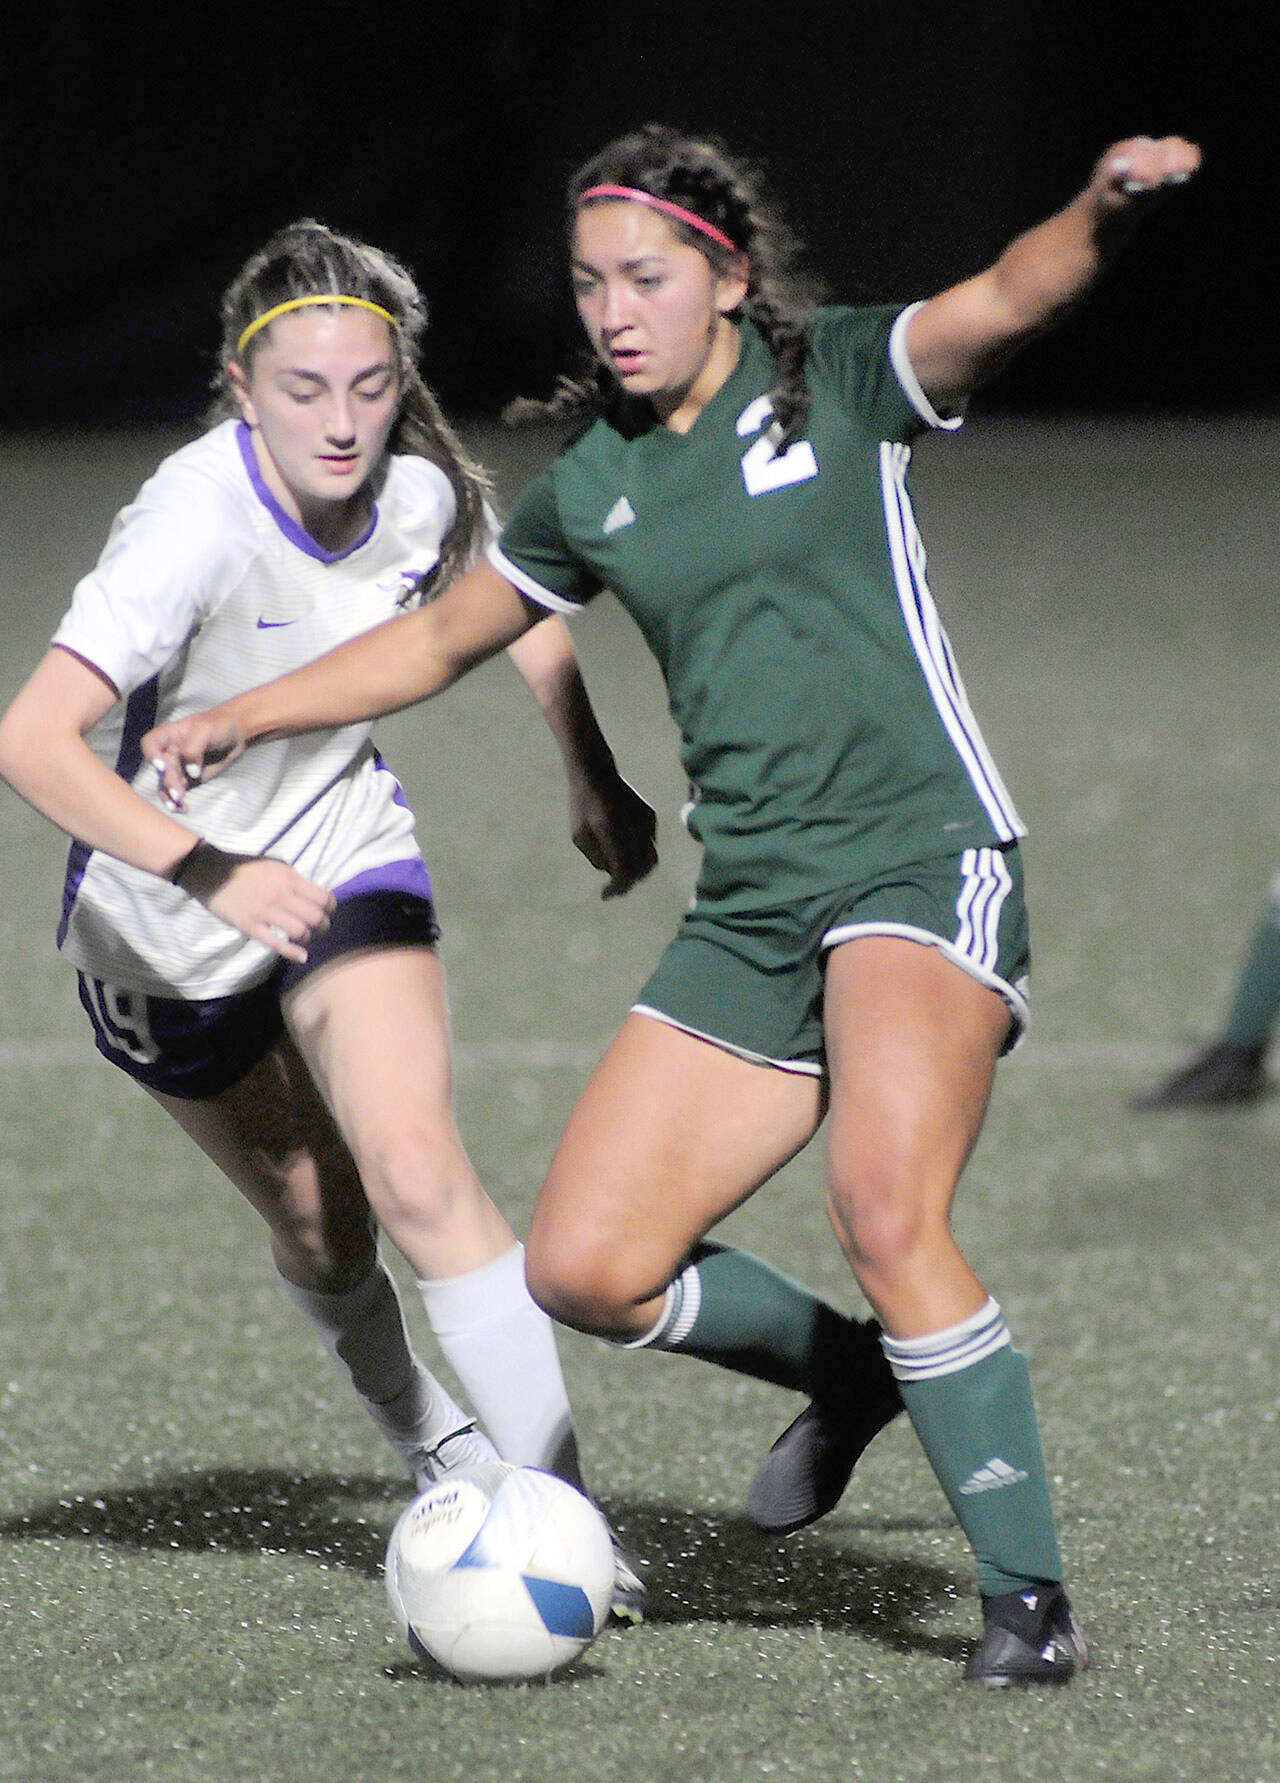 North Kitsap’s Jenna Clark, left, tries to defend against Port Angeles’ Piper Williams on Tuesday in Port Angeles. (Keith Thorpe/Peninsula Daily News)